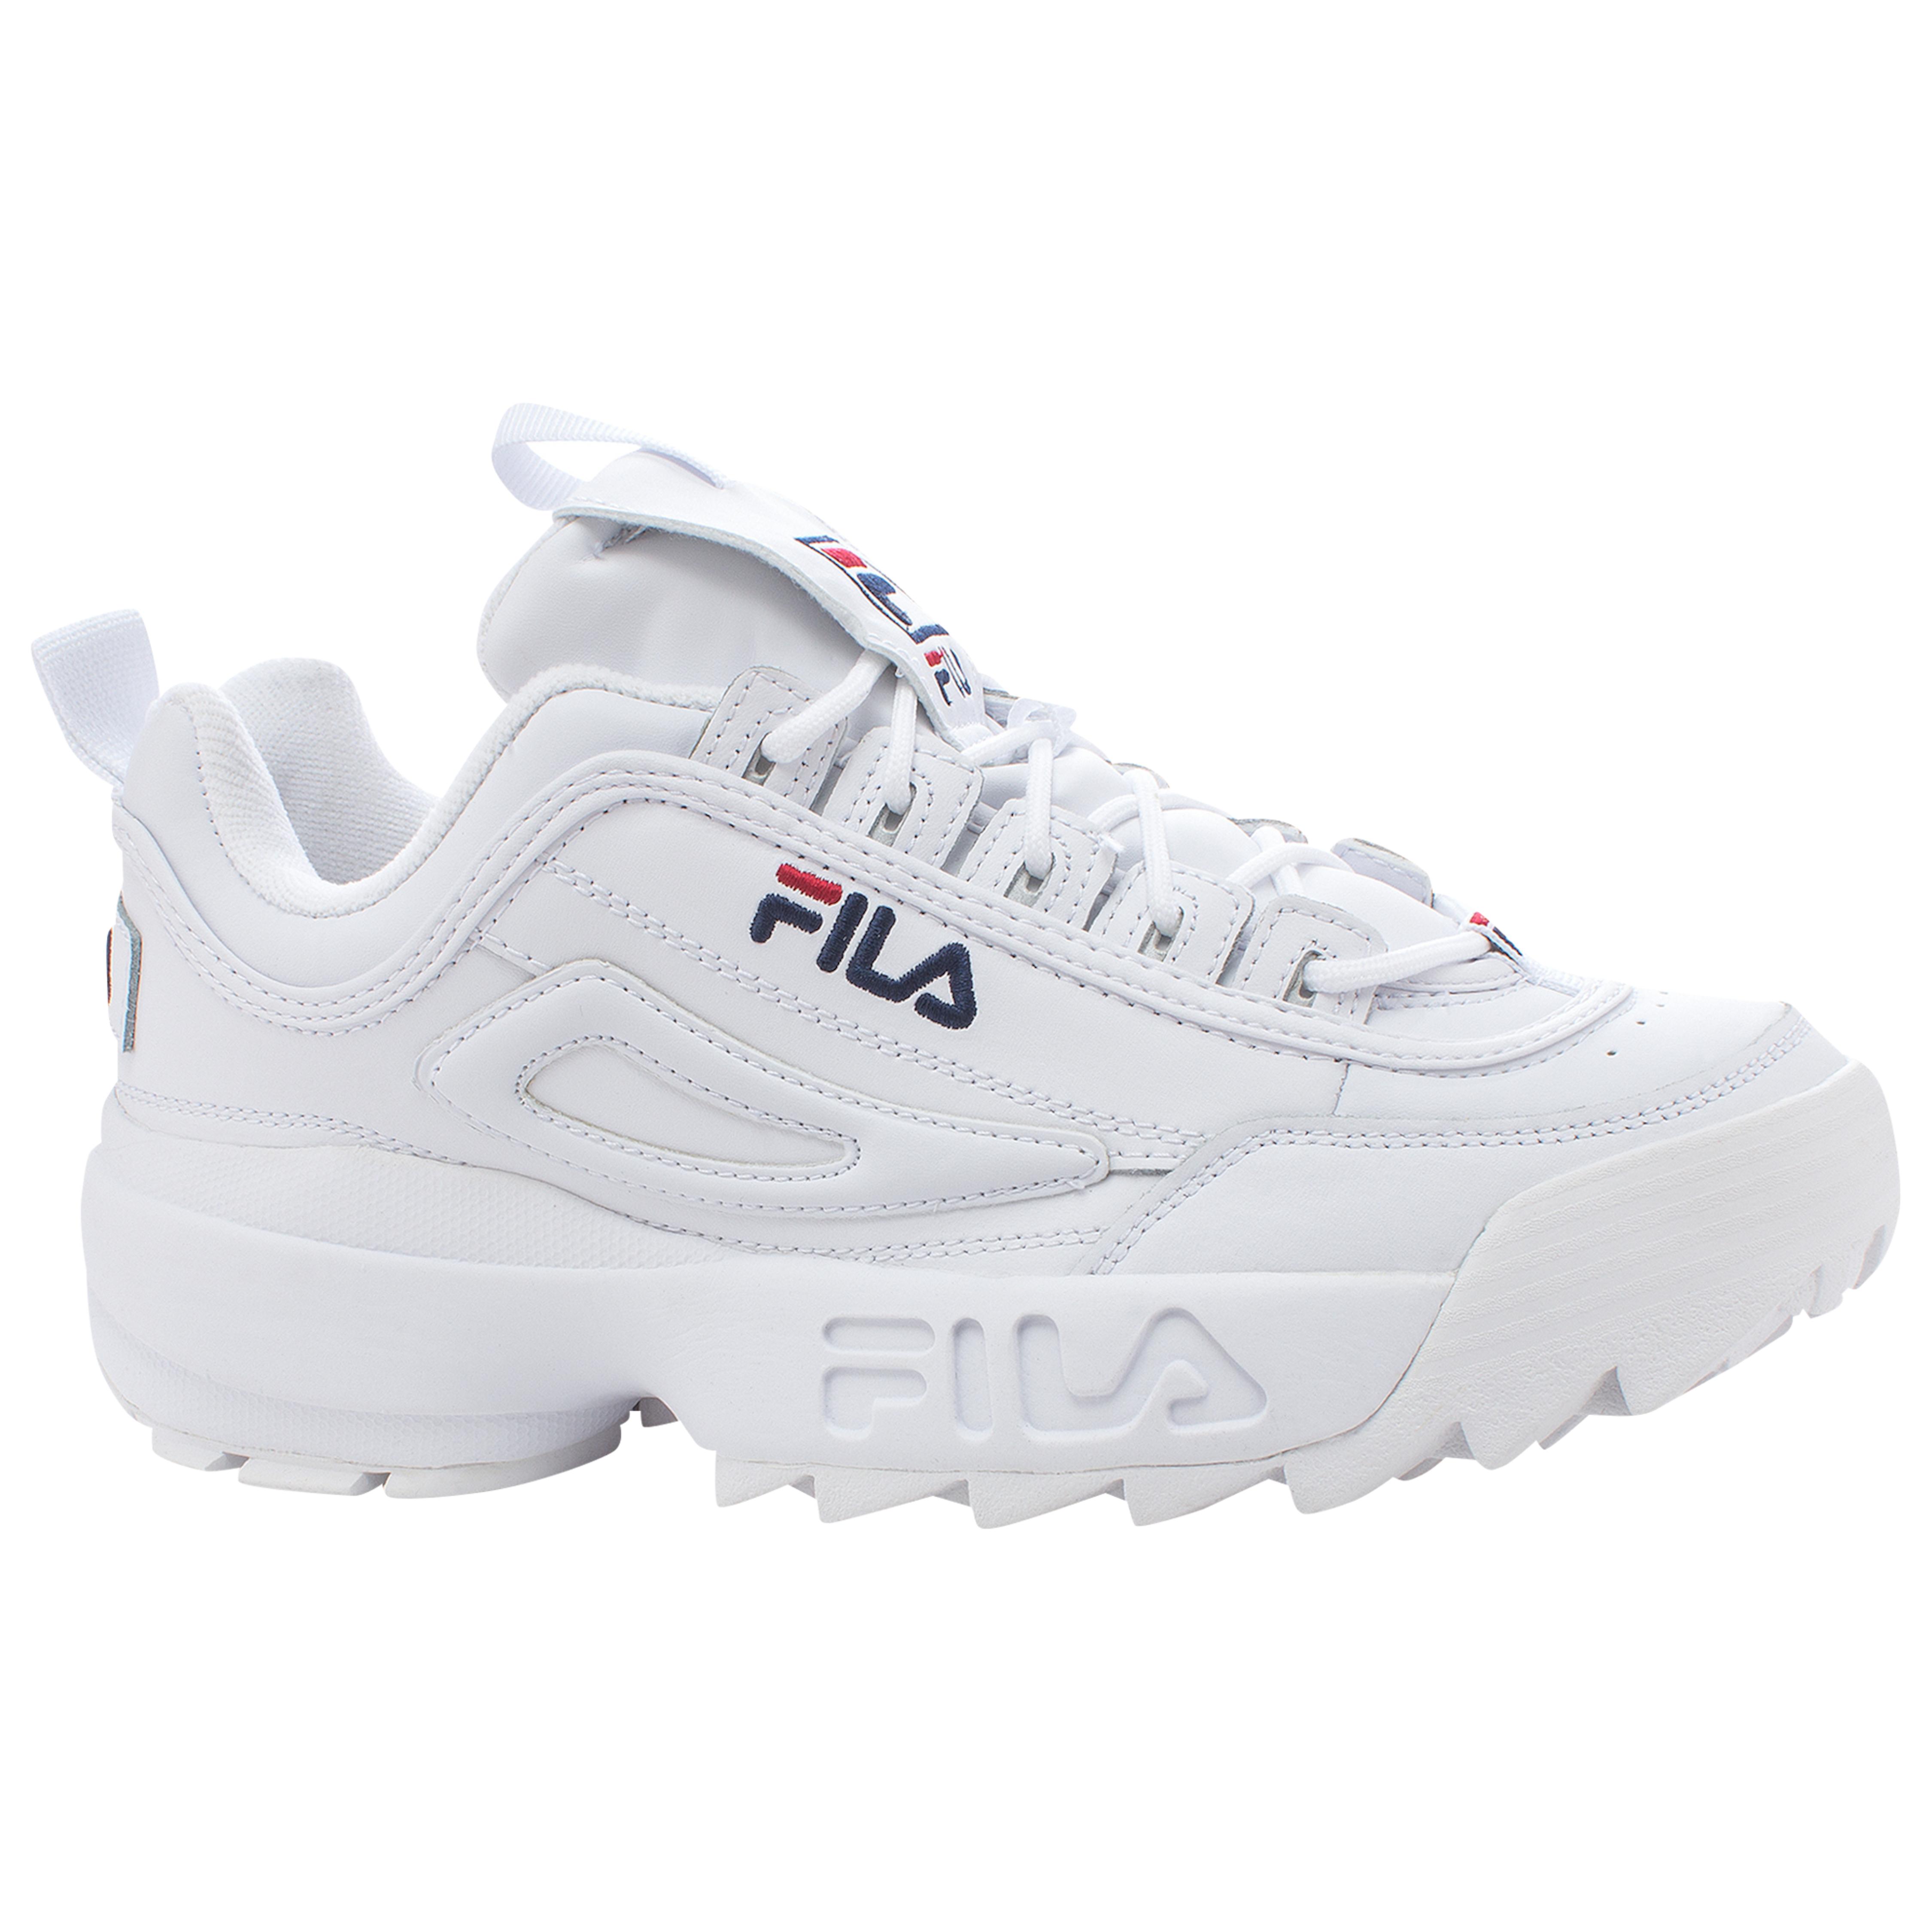 Fila Leather Disruptor Ii in White for Men - Lyst